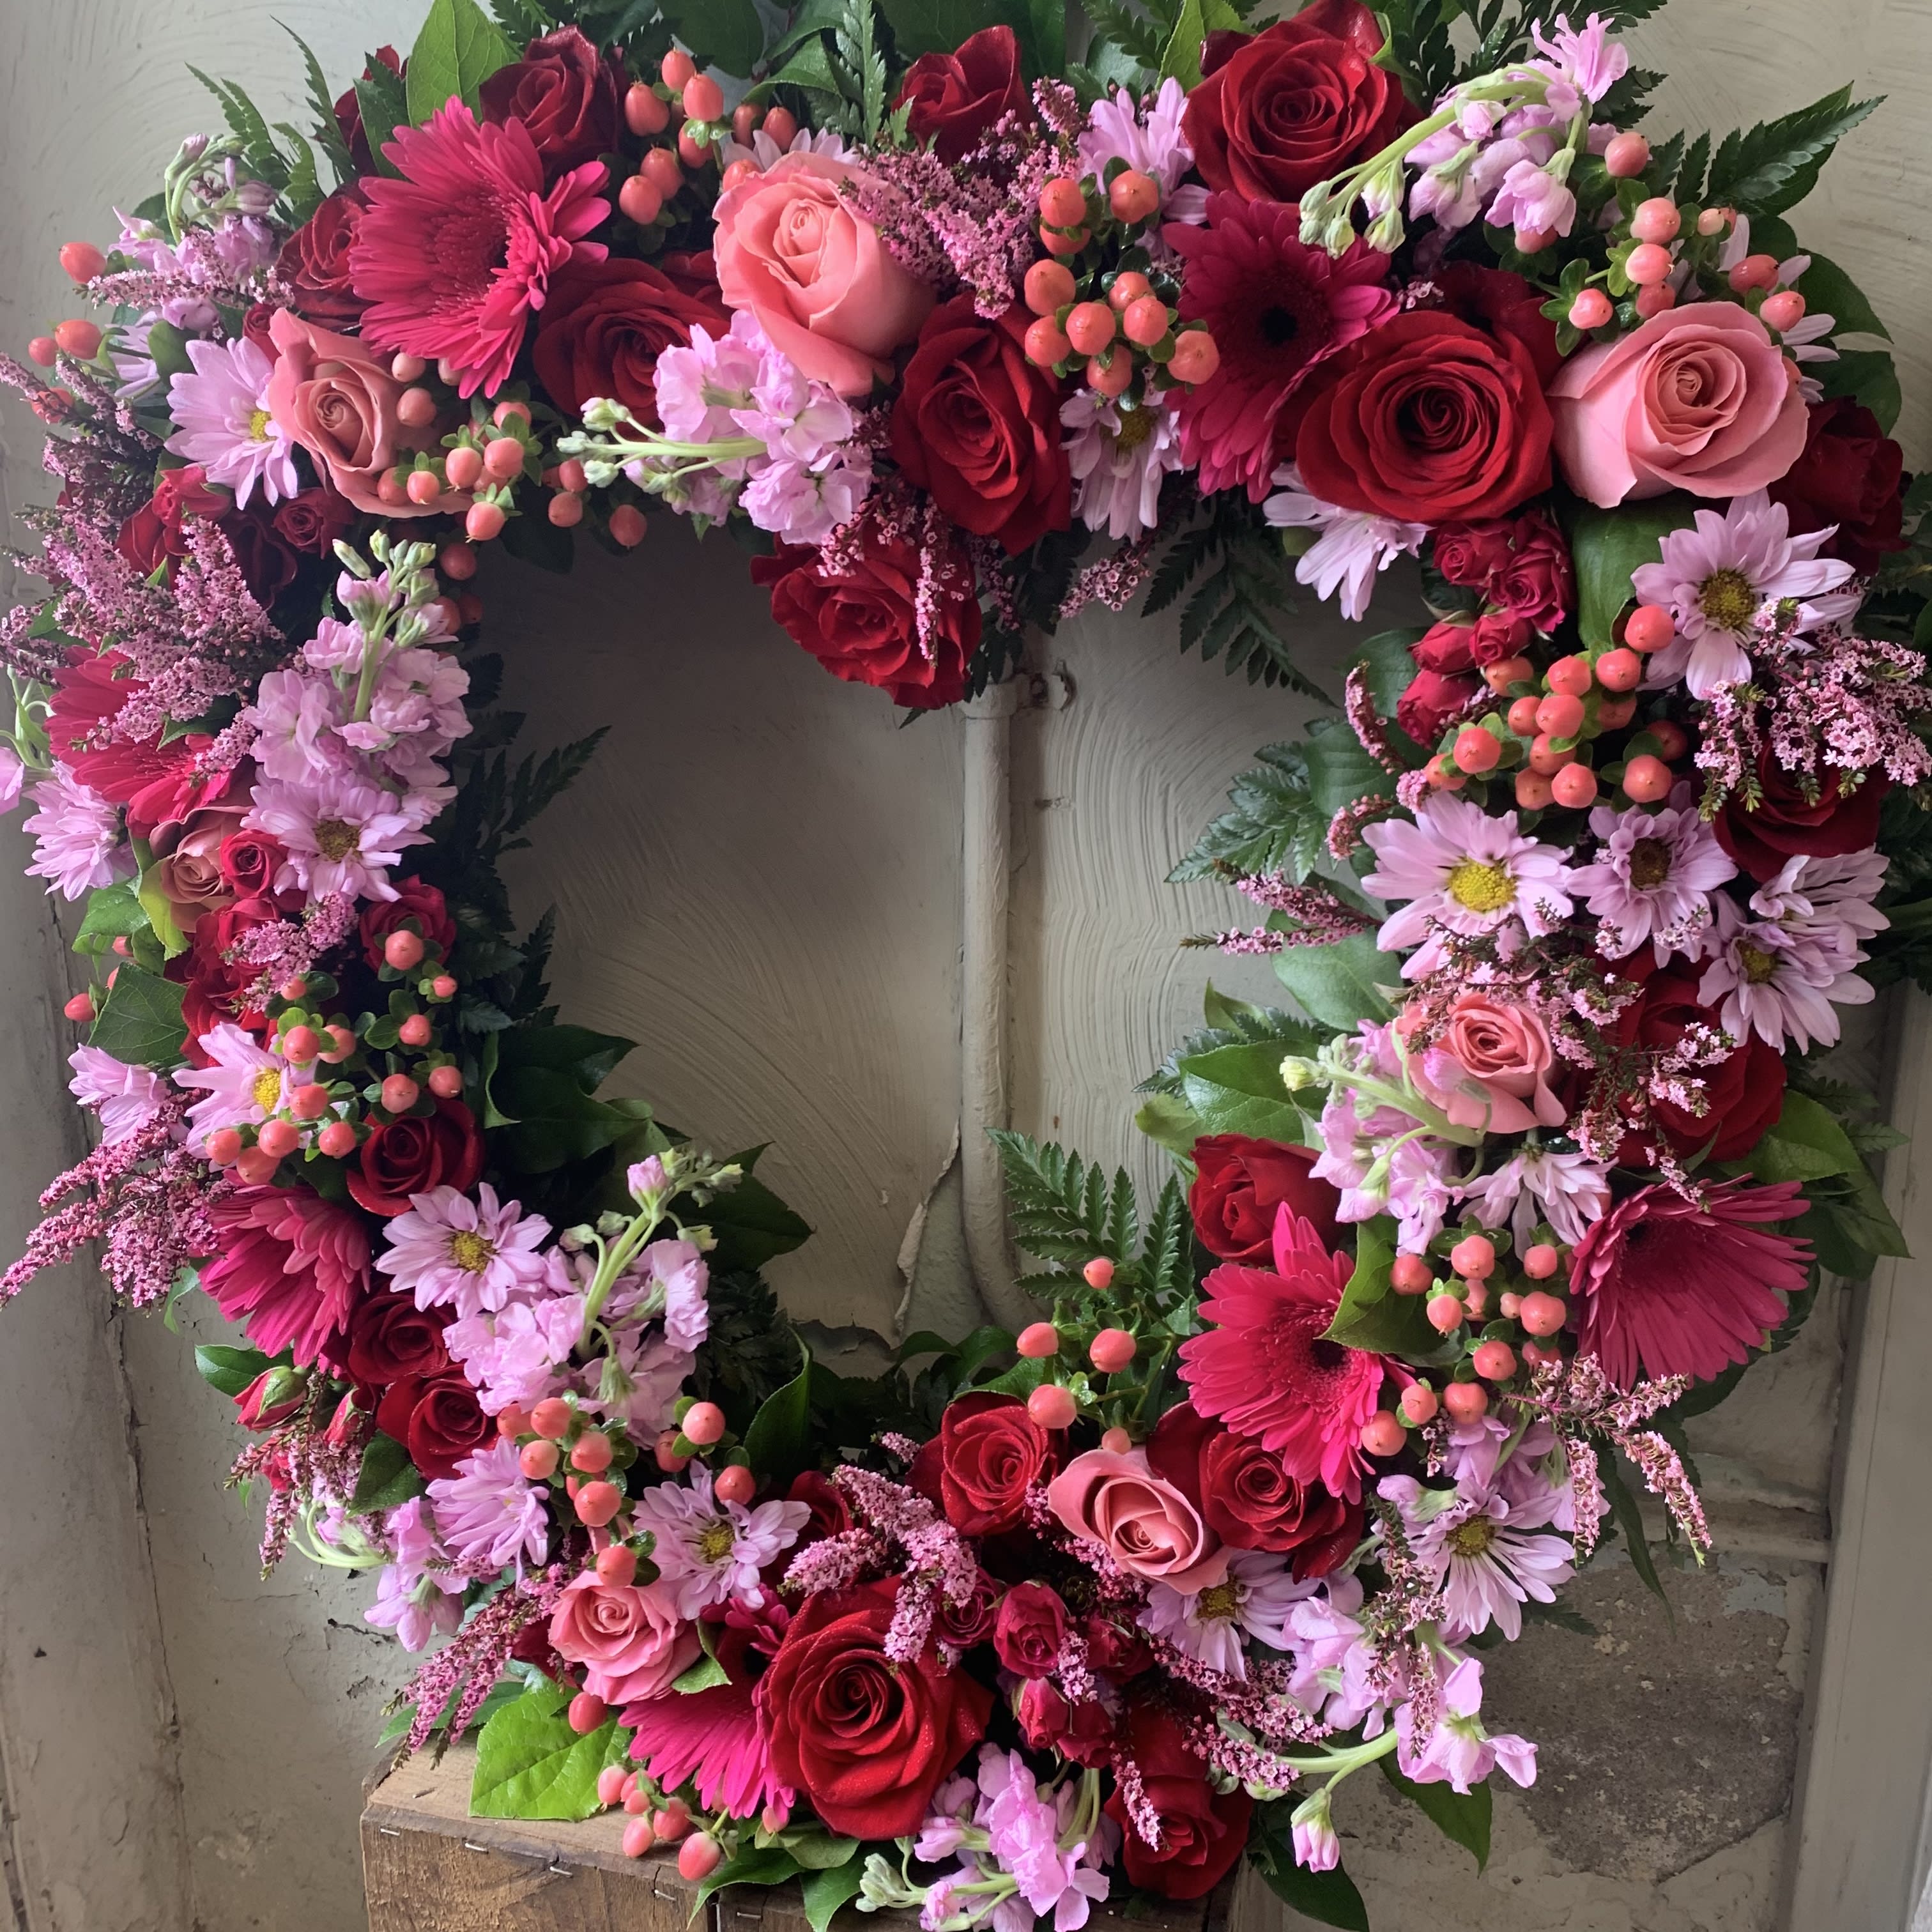 Eternal Open Heart -  Open Heart Easel in feminine pink and red tones. Includes premium roses, spray roses, gerber daisies, mini hydrangea, and other seasonal fresh flowers, arranged on an 18” open heart and displayed on an easel. (Deluxe approx 20” w X 24” h).